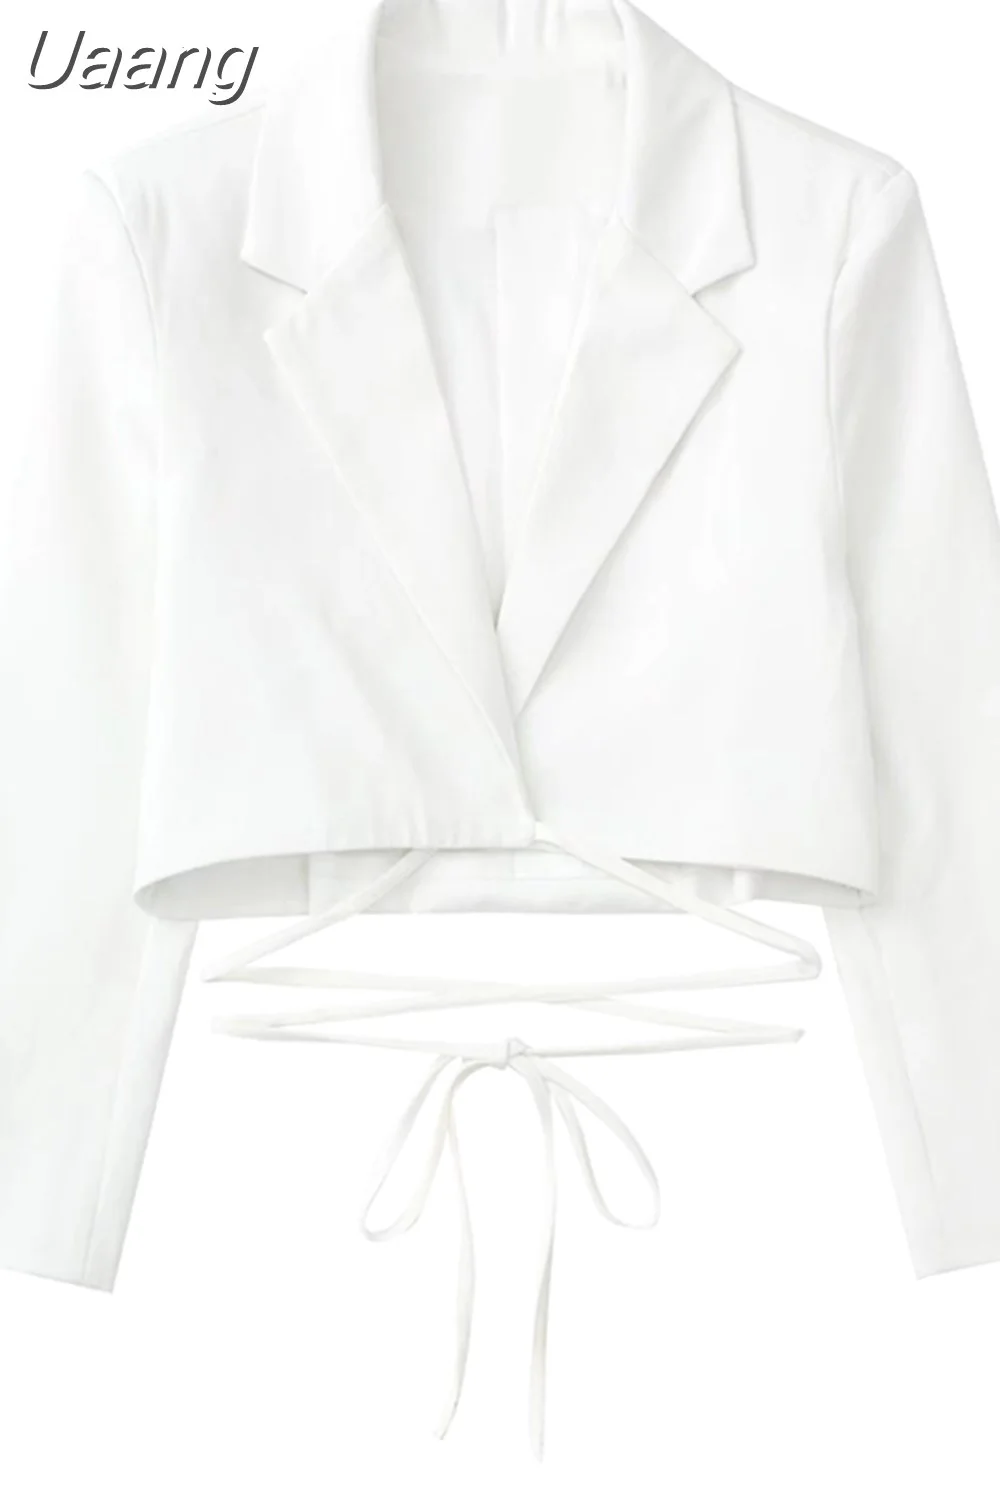 Uaang Women White Cropped Blazer with Ties and High-Waist Shorts Chic Lady Summer Elegant Fashion 2 Piece Set 2023 ensemble femme